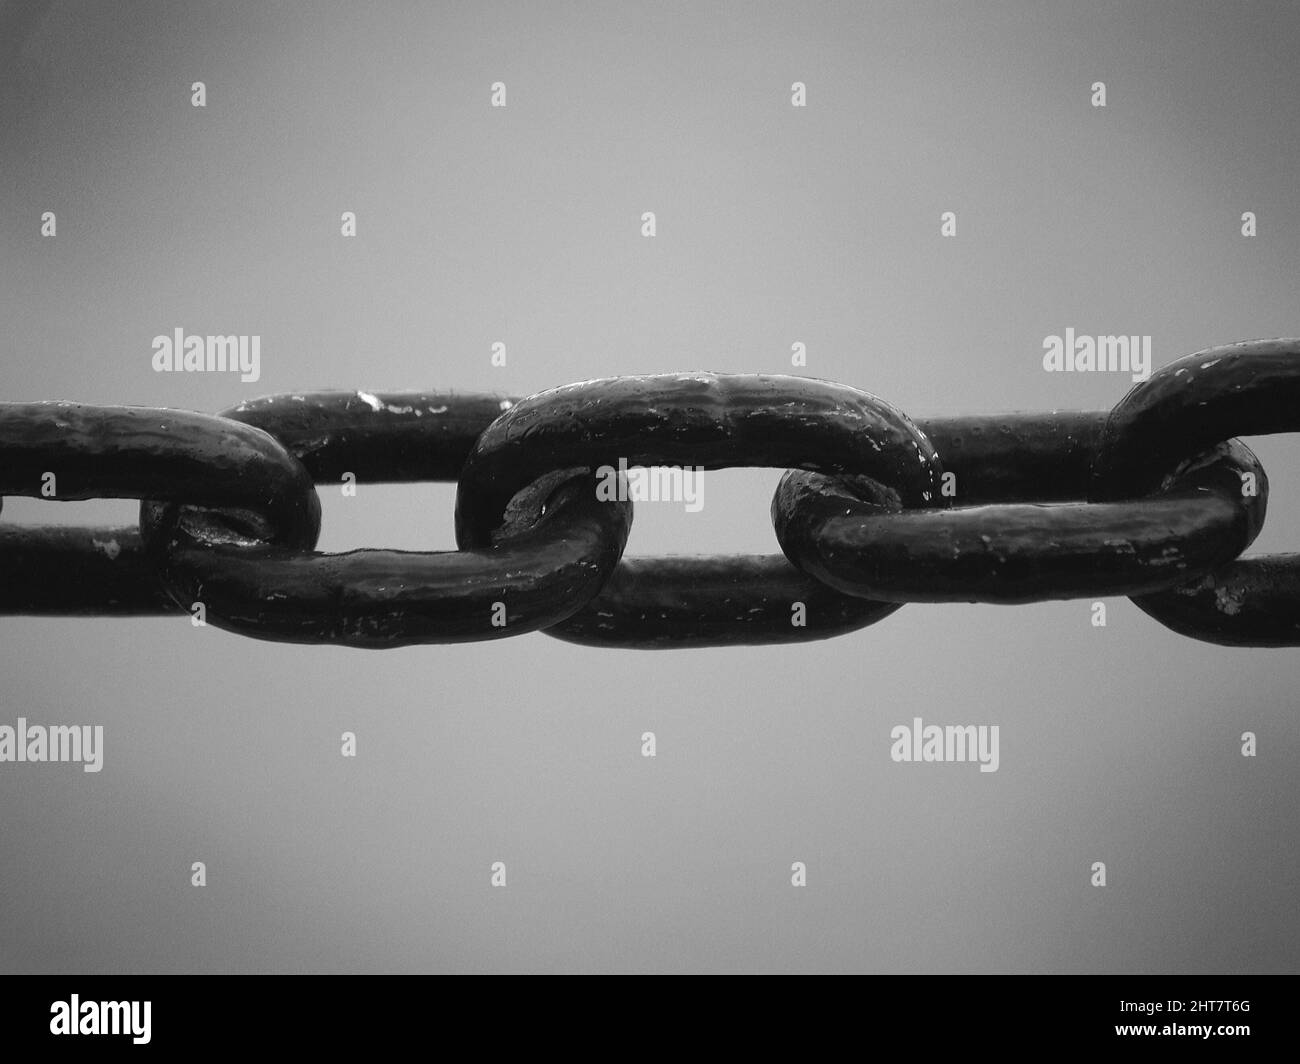 A grayscale view of a grungy chain Stock Photo